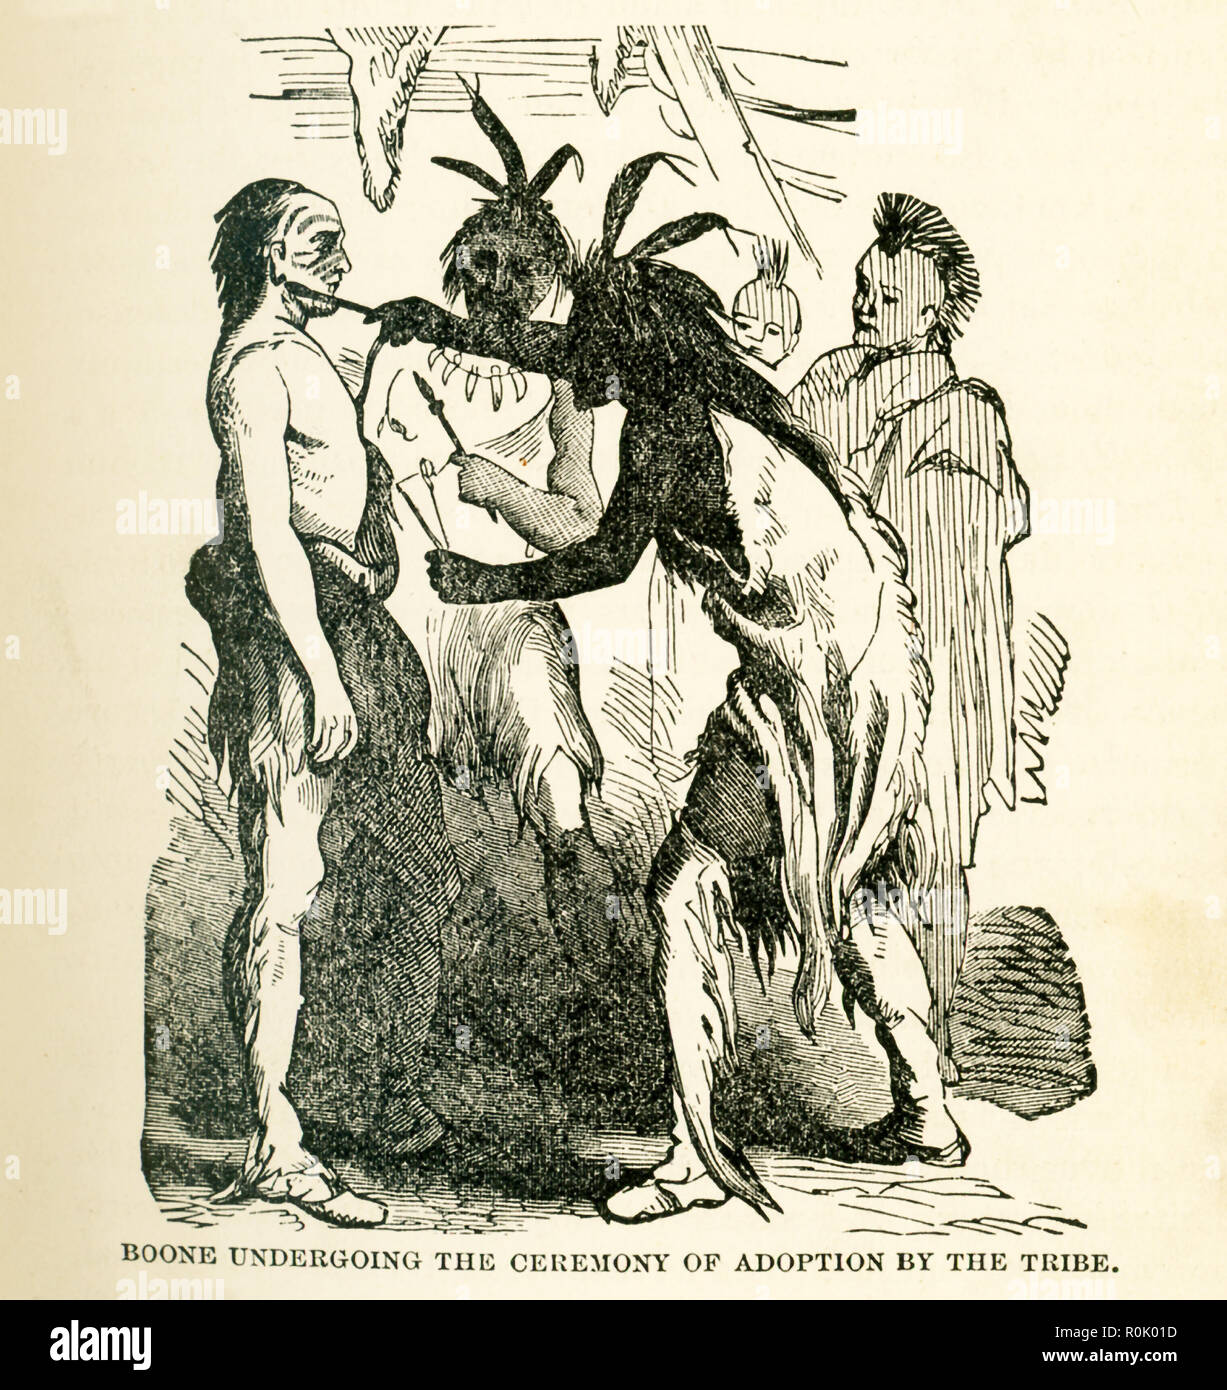 The caption reads: Boone Undergoing ceremony of adoption by the tribe. Here, Blackfish, chief of the Shawnee, performs the adoption ceremony of Boone into the tribe. Blackfish adopted Boone as his son (Blackfish's favorite son had died in battle). Boone agreed and remained for a while - when the Shawnee were preparing another attack, Boone escaped and returned to Boonesborough. This illustration is from the book titled: Story of the Wild West and Camp Fire Chats: Being the Complete and Authentic History of the Great Heroes of the Western Plains, Buffalo Bill, Wild Bill, Kit Carson, Daniel Boon Stock Photo